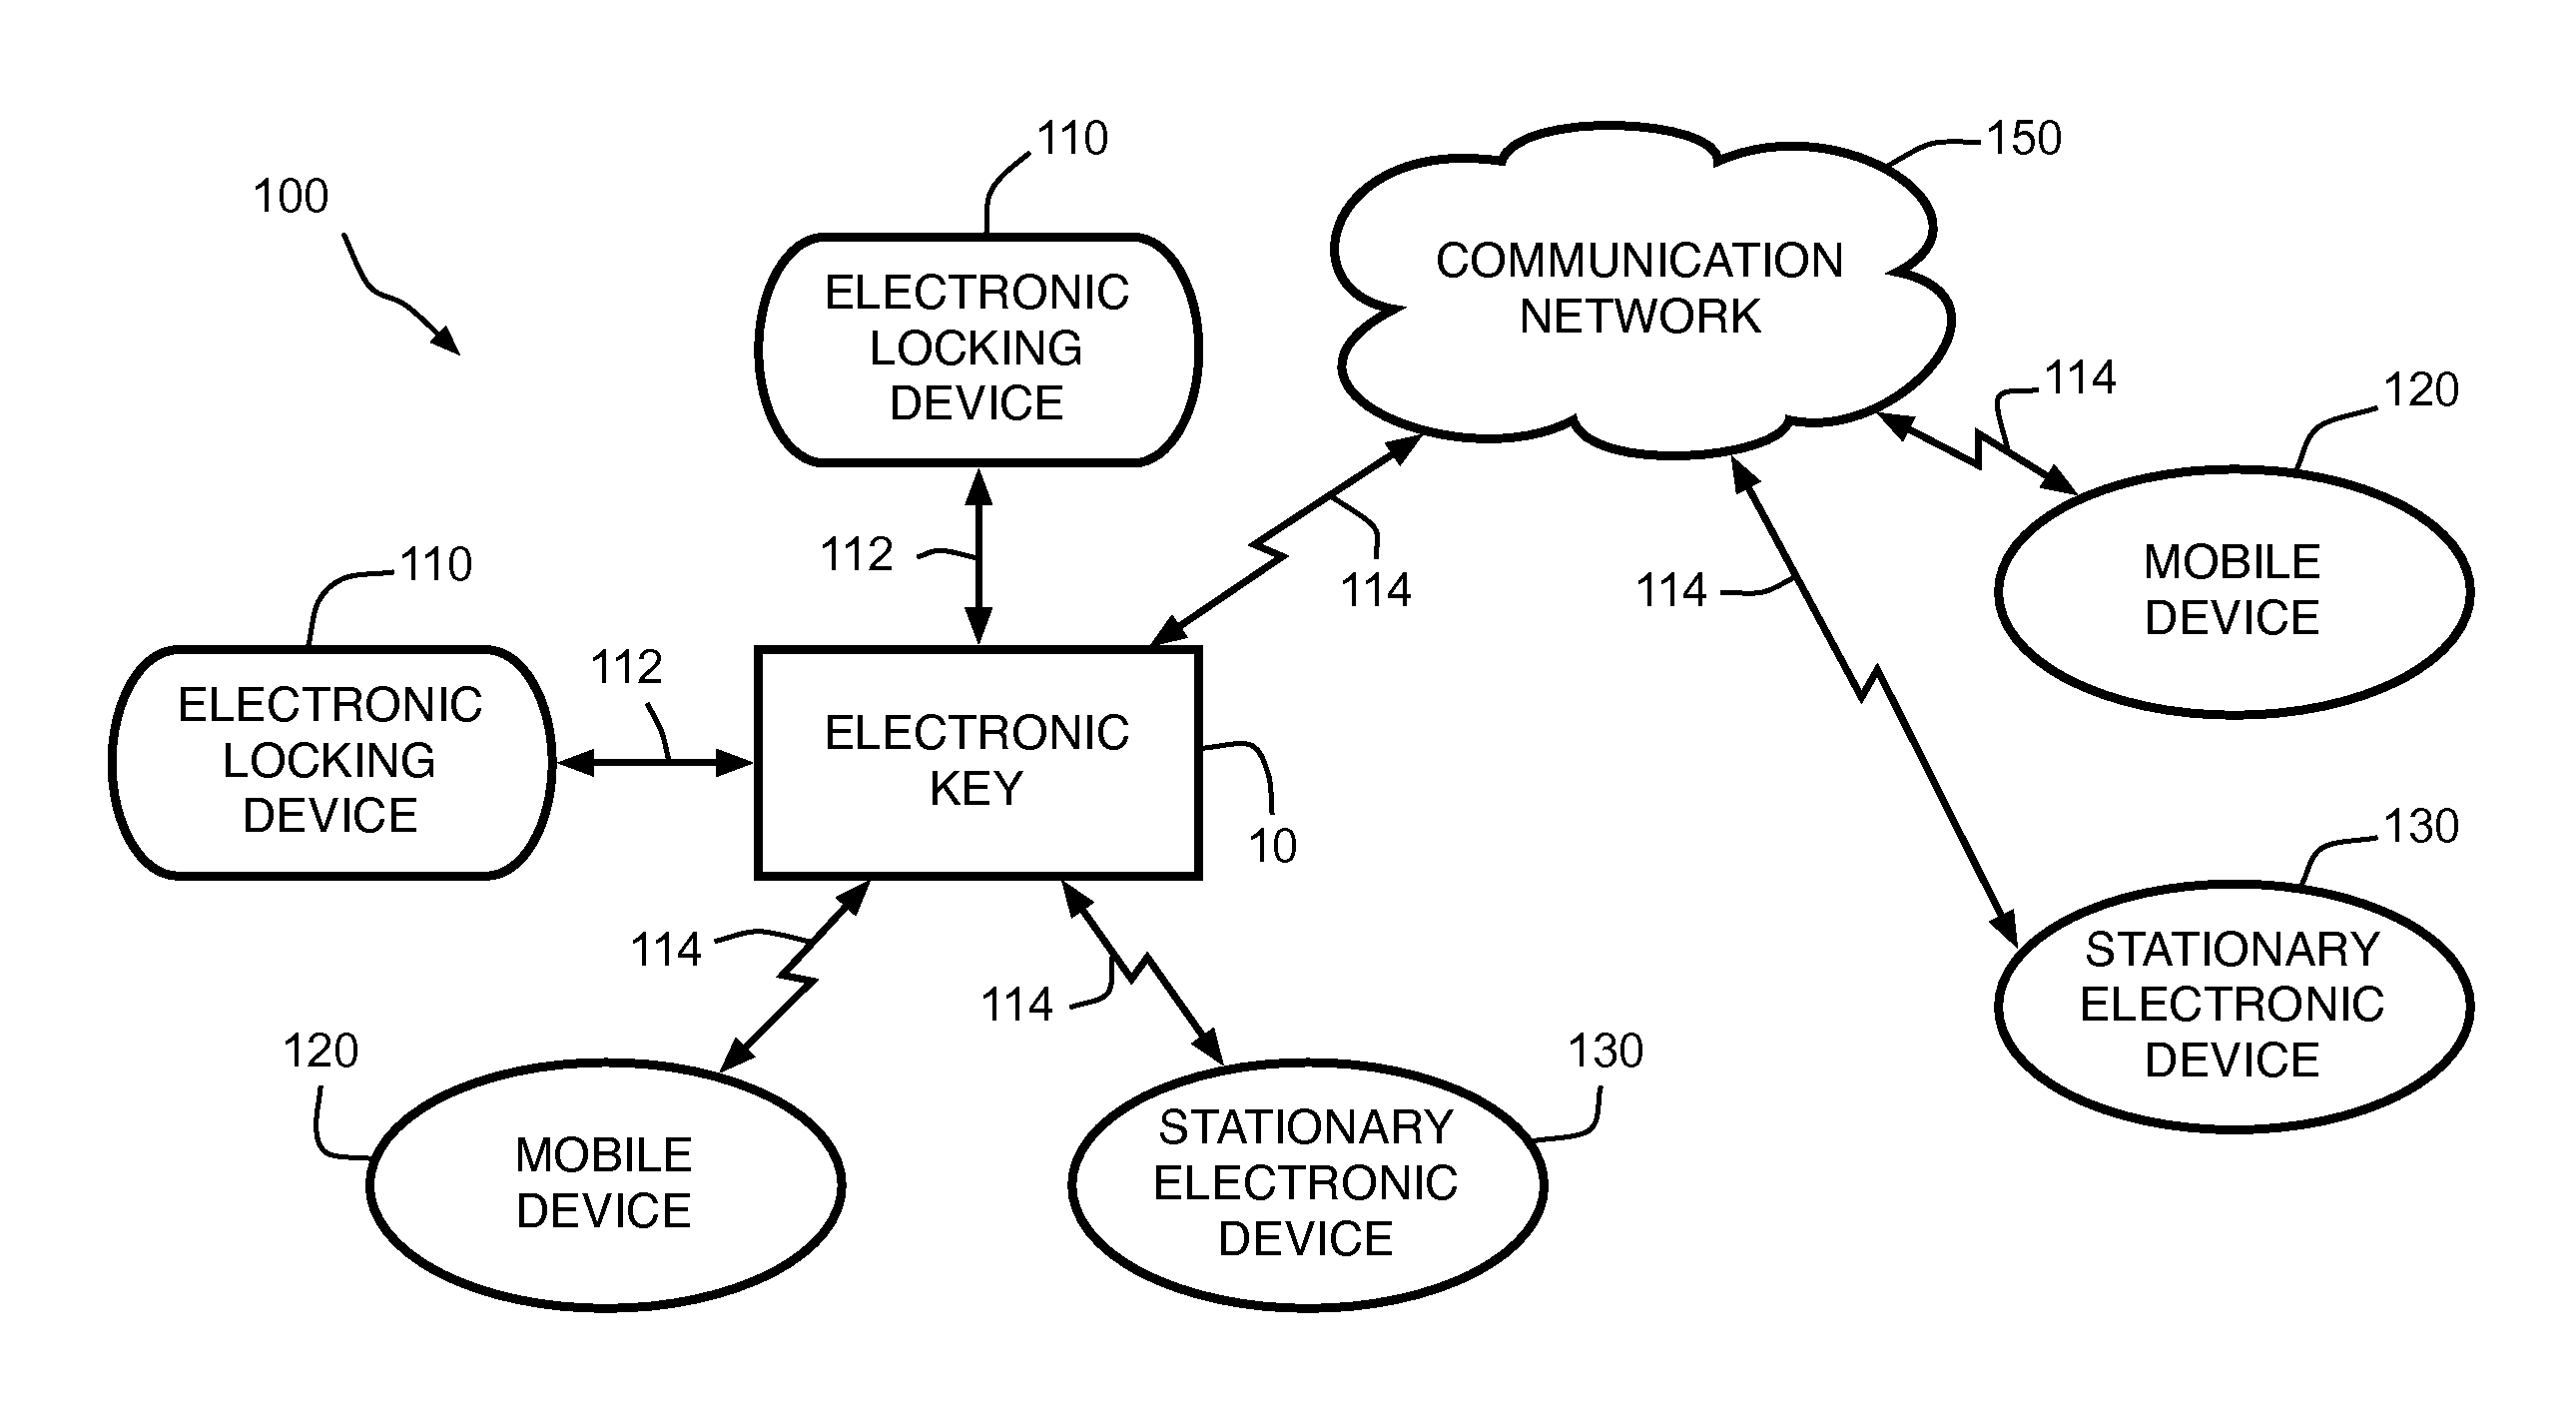 Apparatus and method for remote administration and recurrent updating of credentials in an access control system